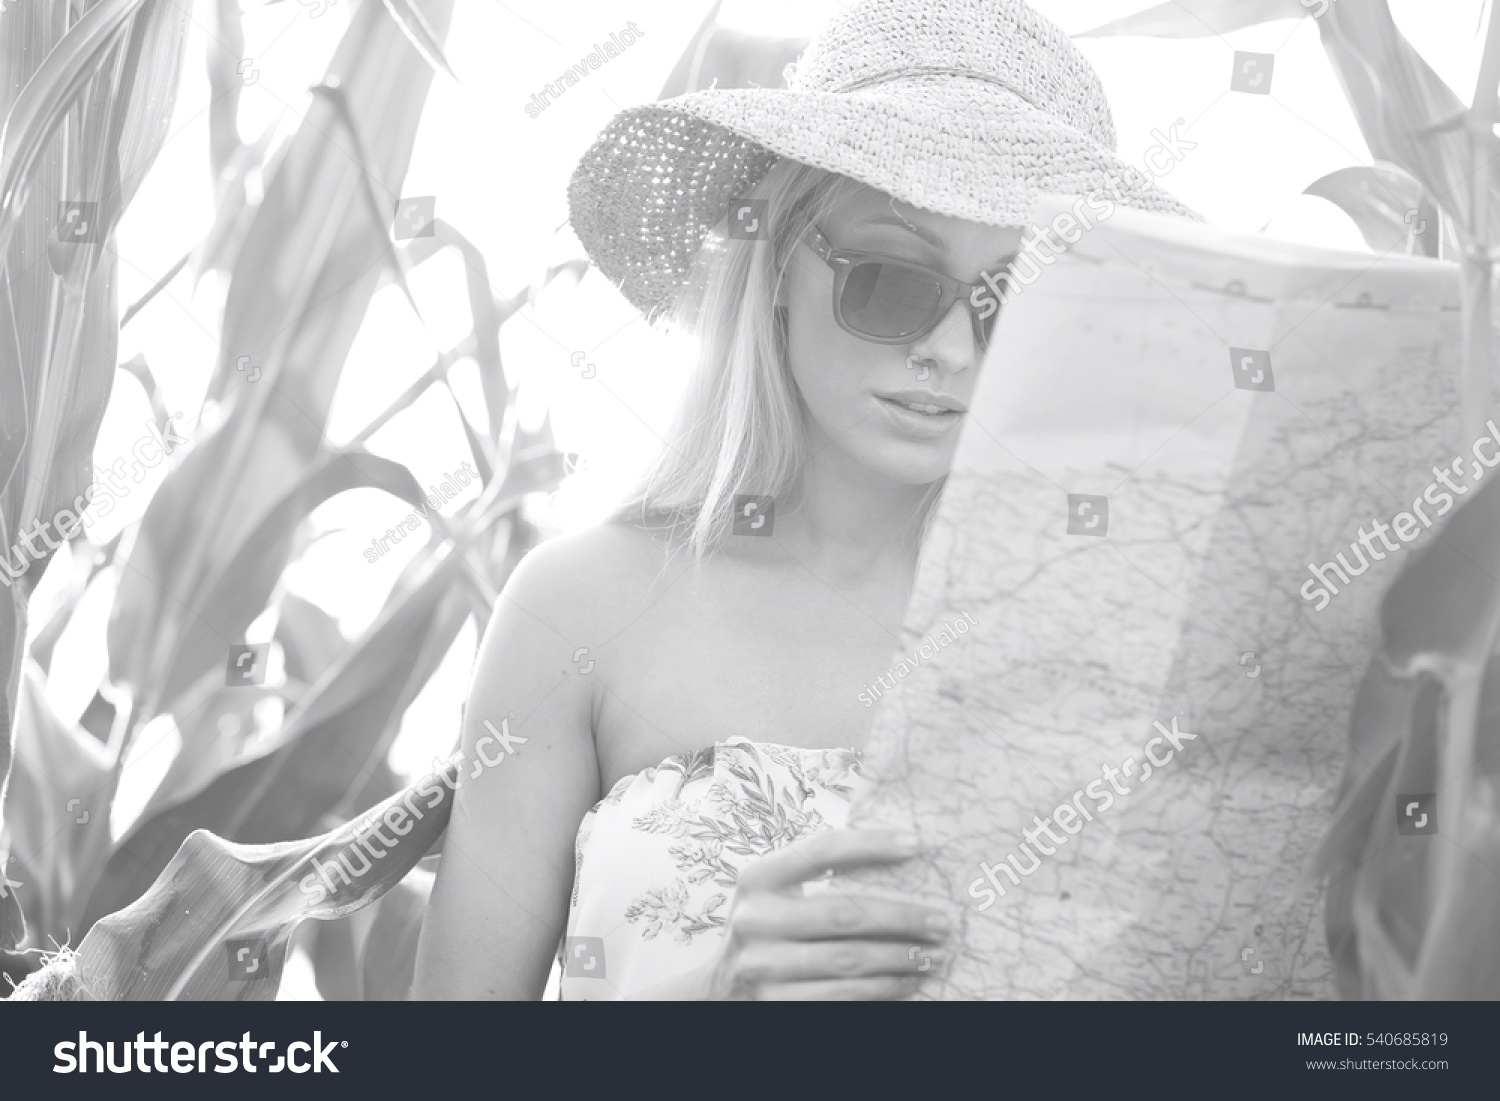 Woman reading map while standing amidst plants outdoors #540685819